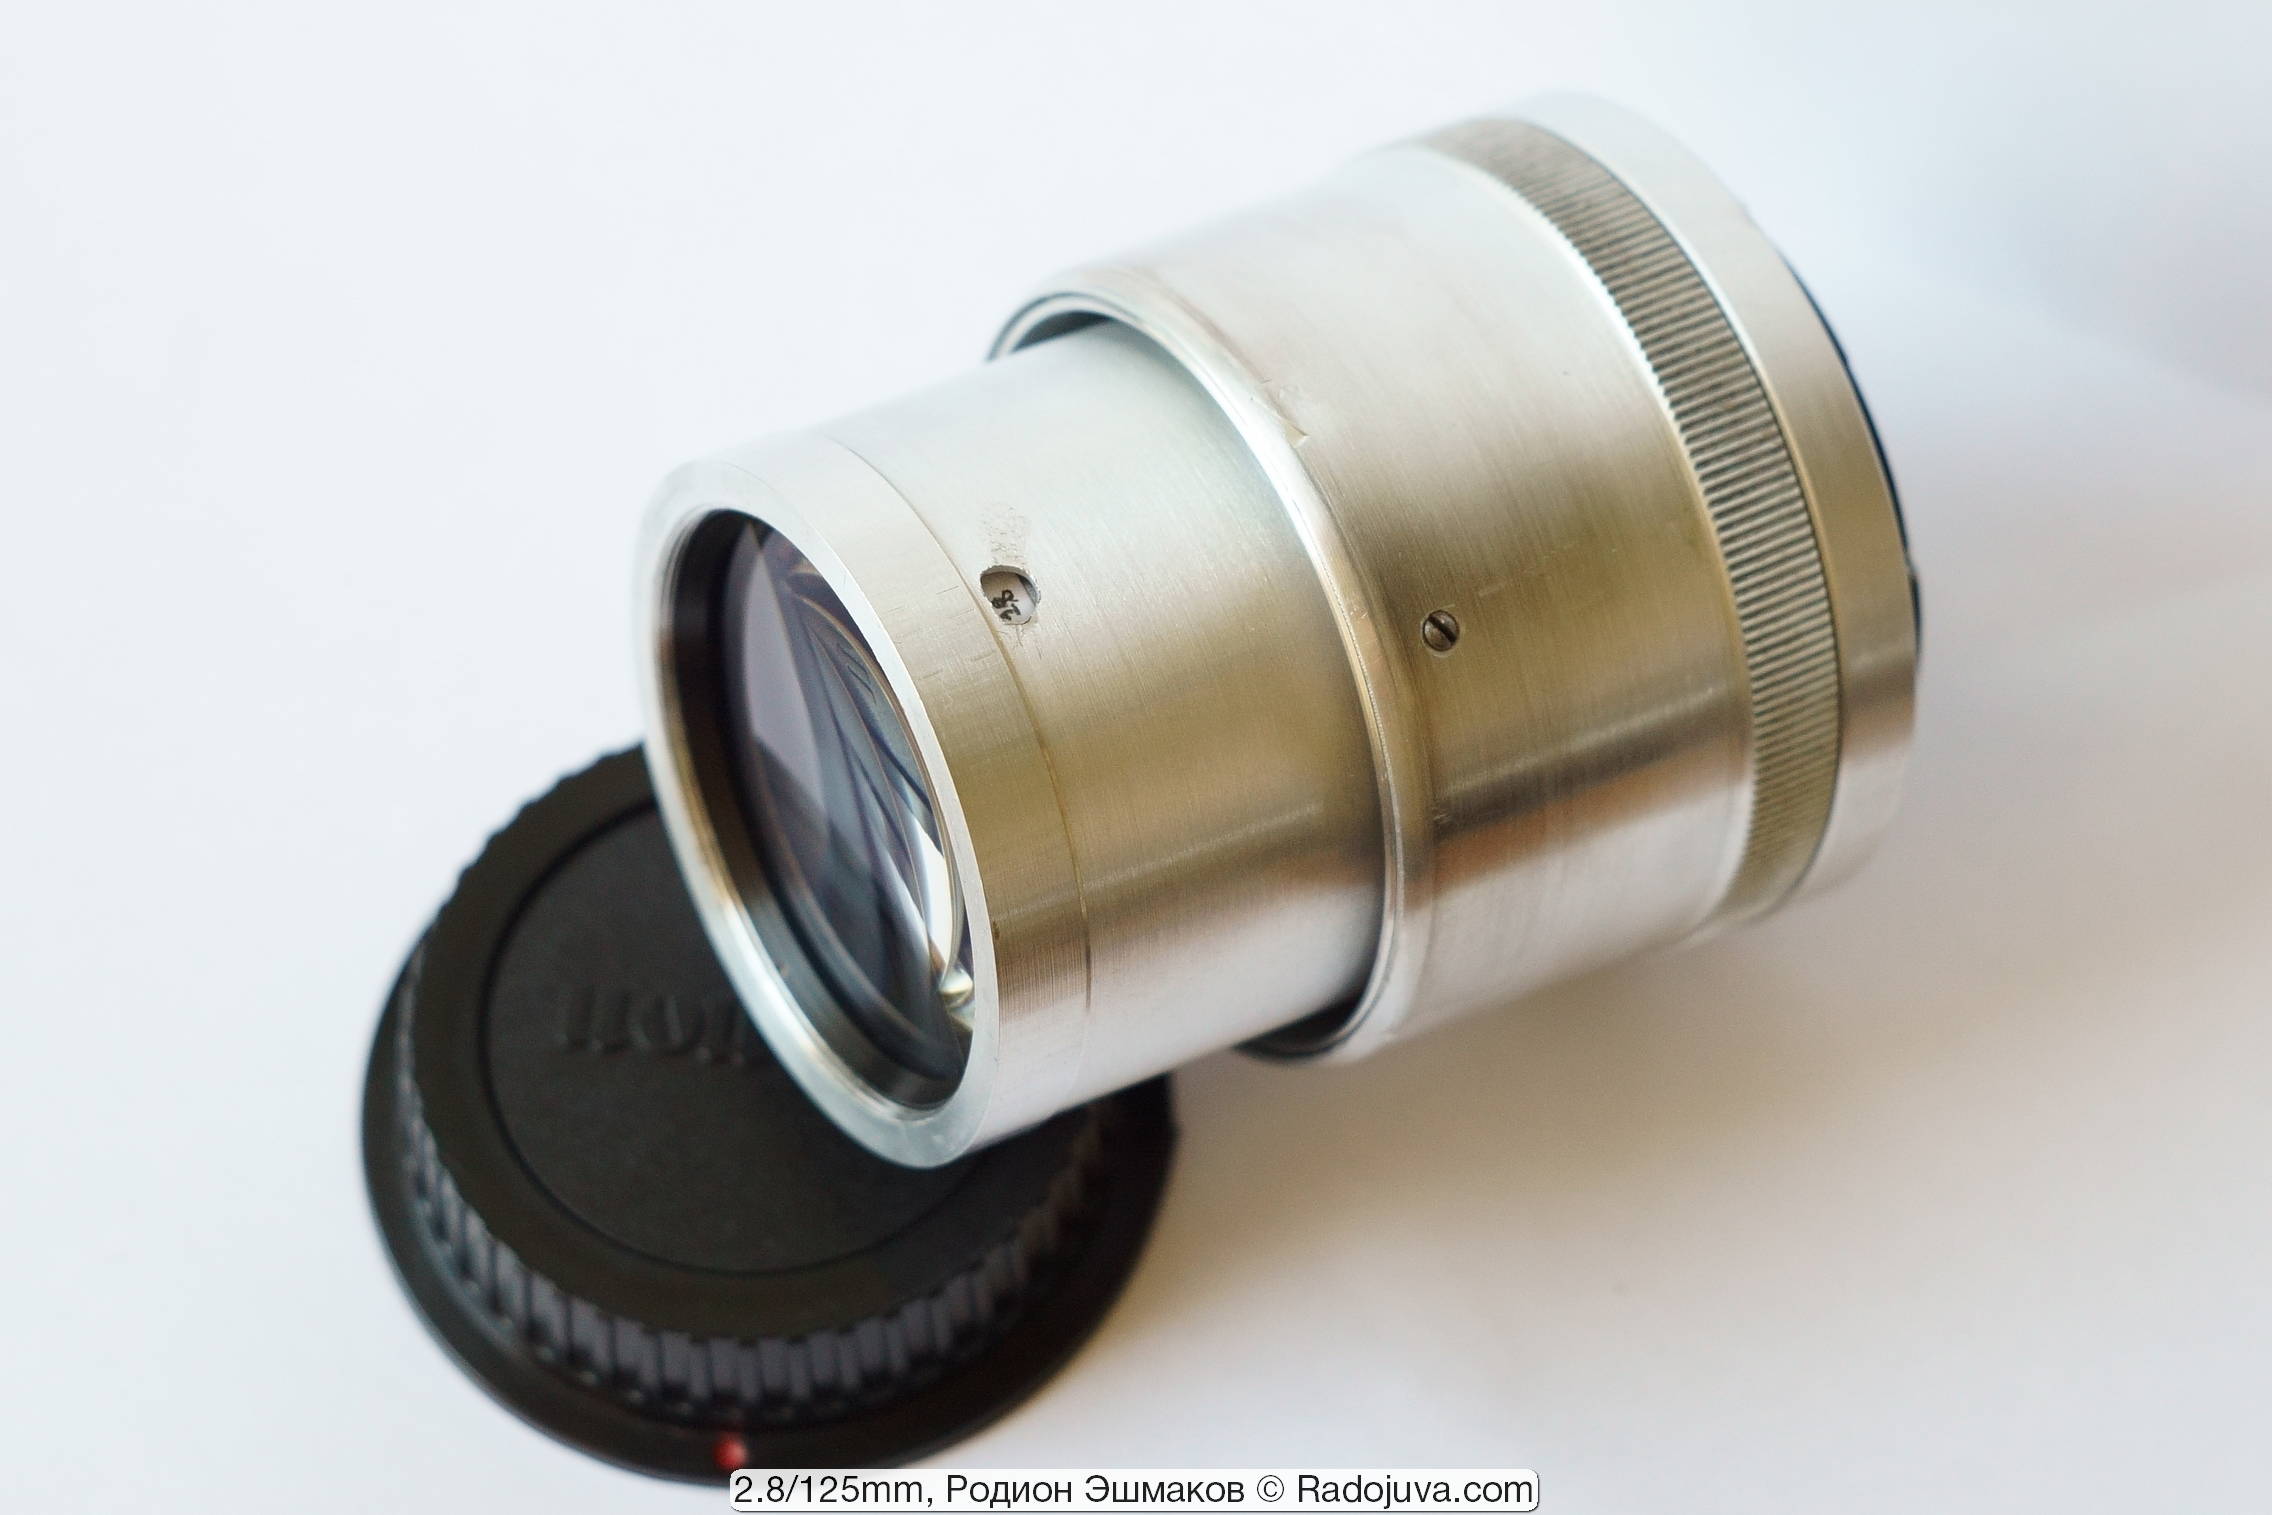 The aperture is adjusted by rotating the nose, and the current aperture value is indicated in the window.